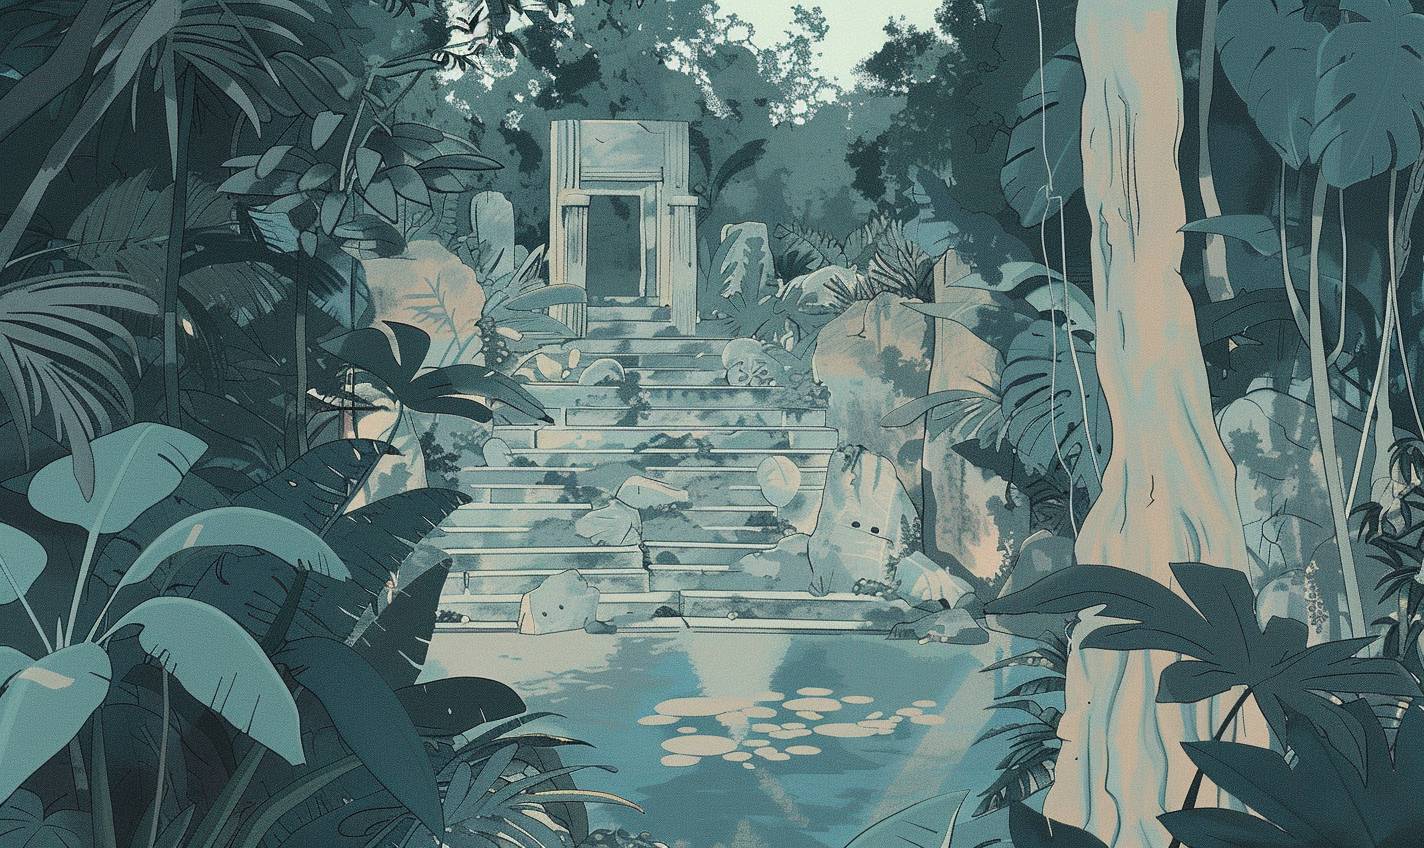 In the style of Harriet Lee-Merrion, jungle expedition with lost ruins